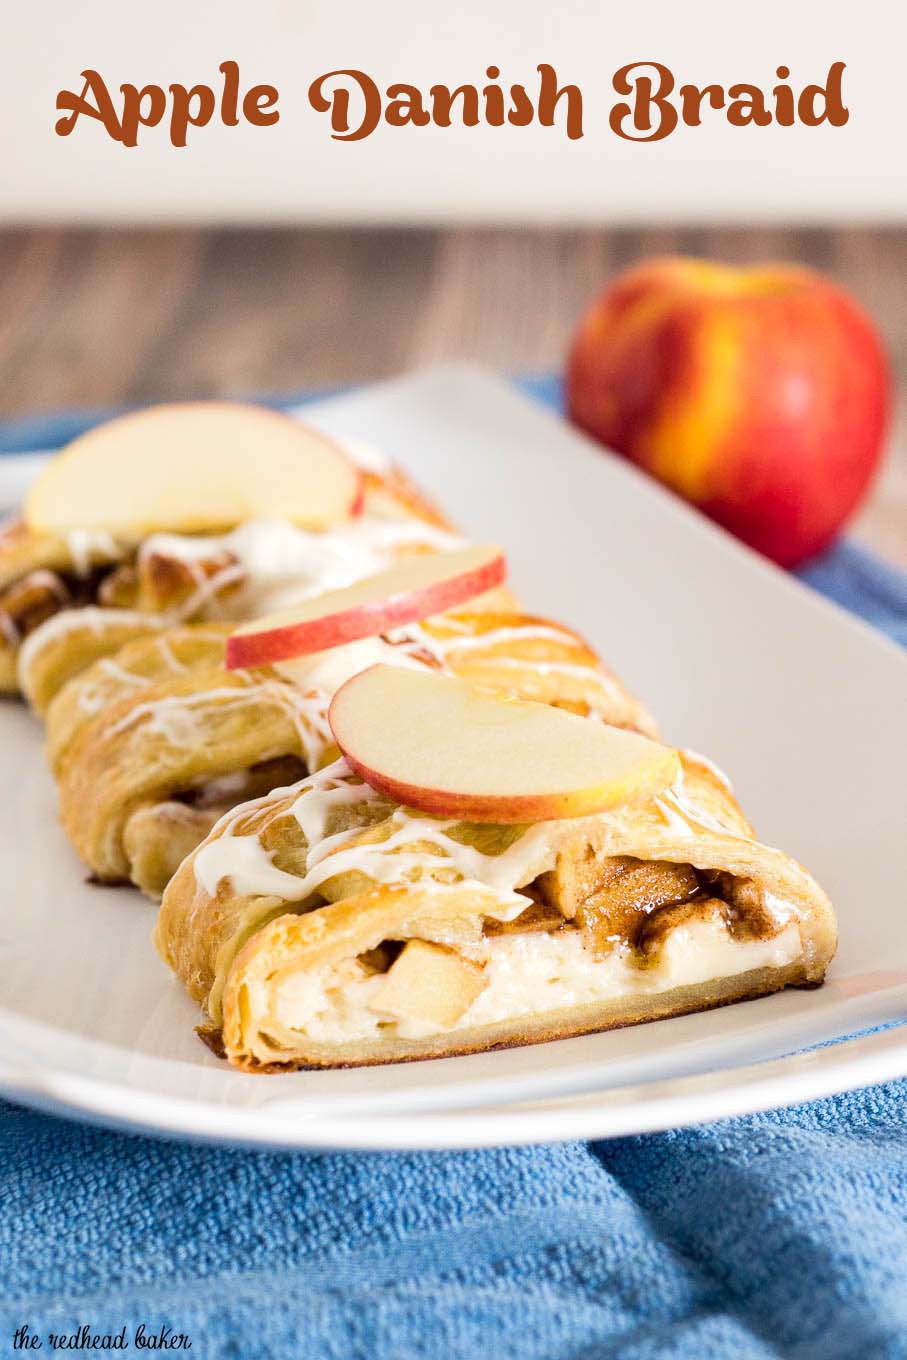 An apple Danish braid is a delicious fruit-filled pastry to serve at brunch. Flaky pastry covers sauteed cinnamon apples and sweetened cream cheese. #BrunchWeek